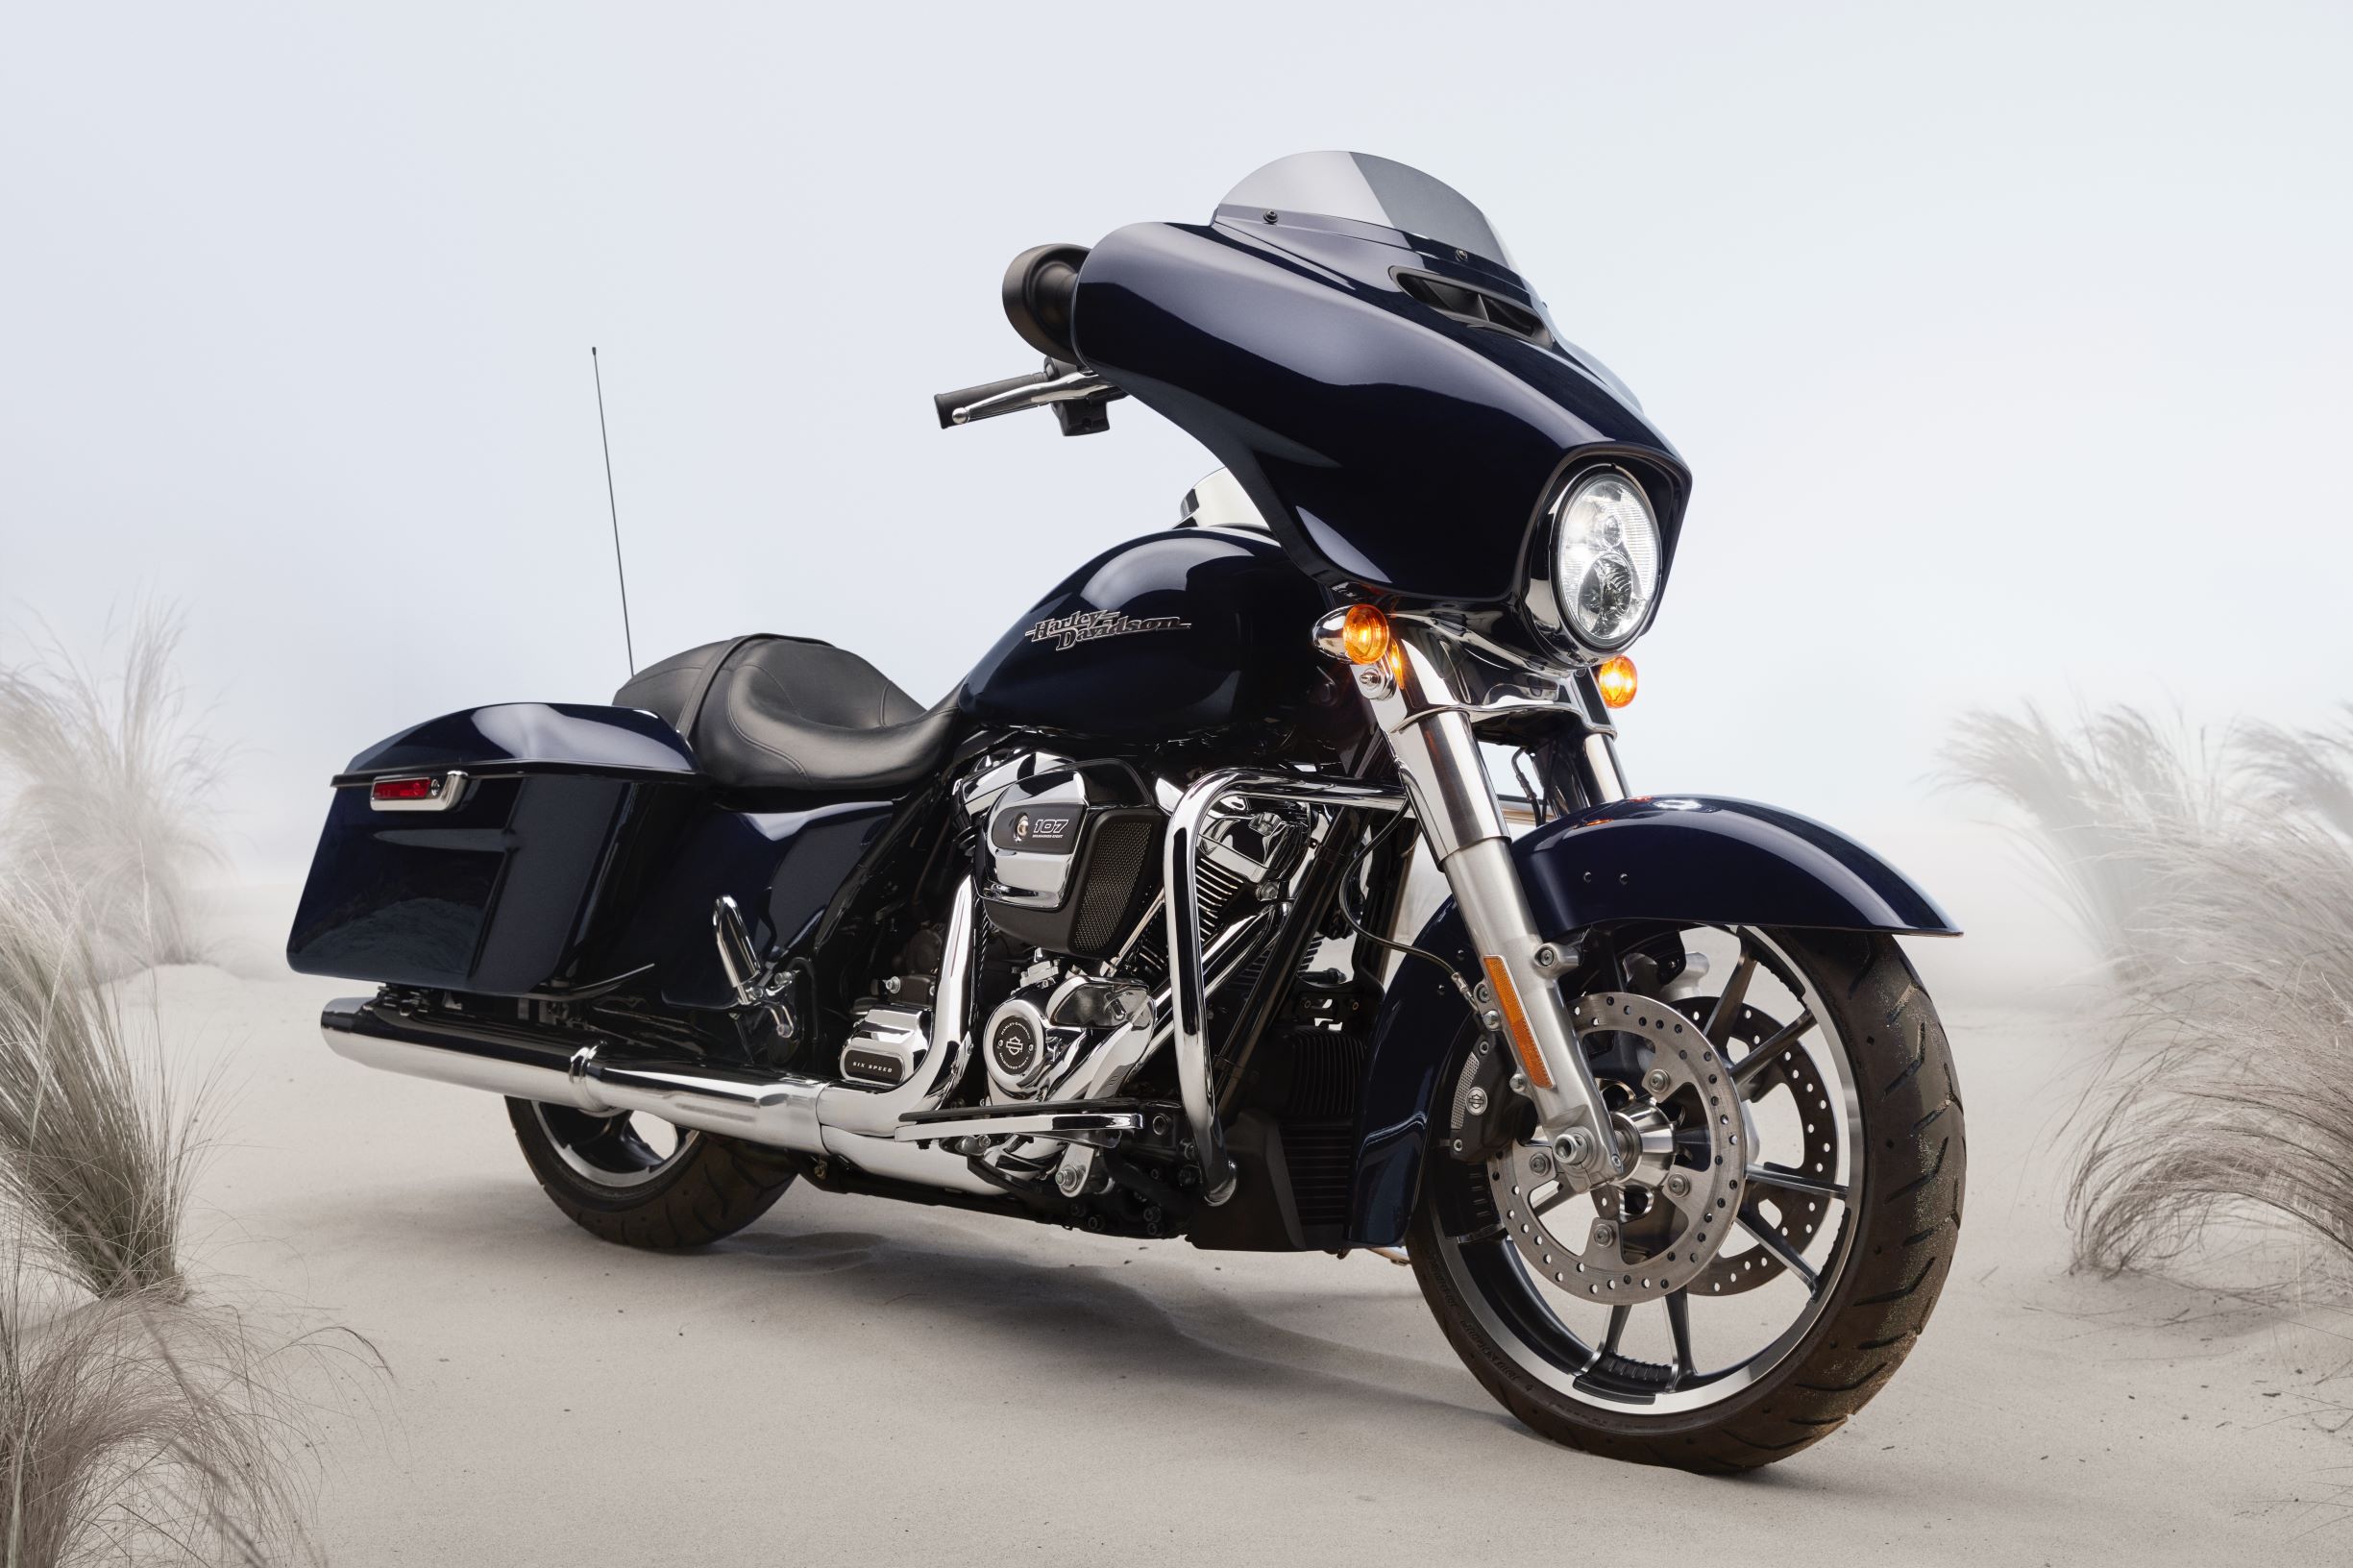 Is The 2020 Harley Davidson Street Glide The Best Cruiser To Buy